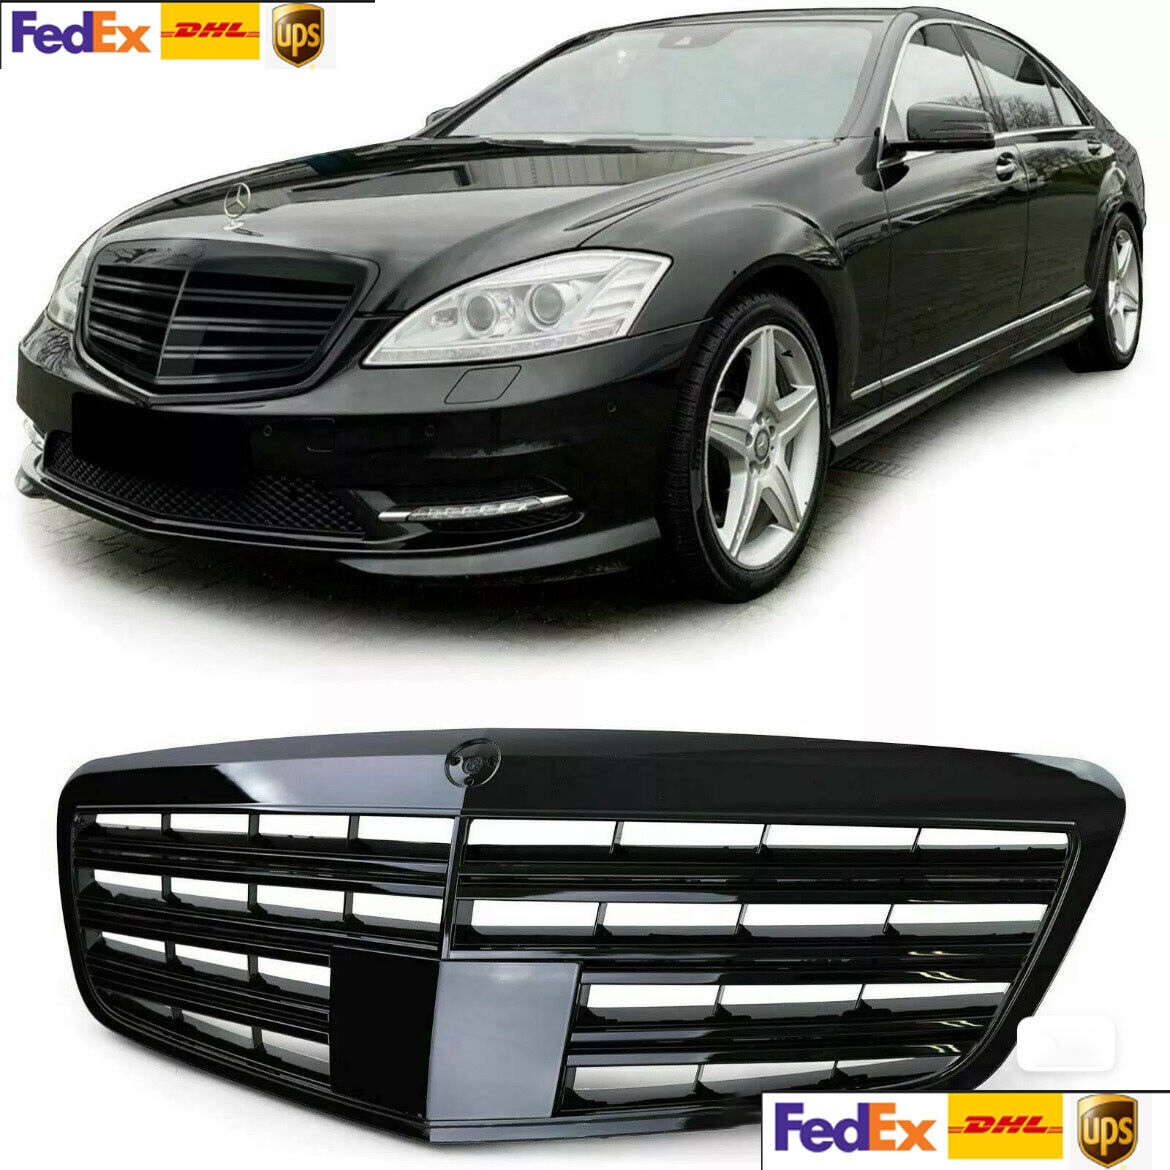 Gloss Black Front Grille for Mercedes Benz S-Class W221 S550 S600 S63 S65